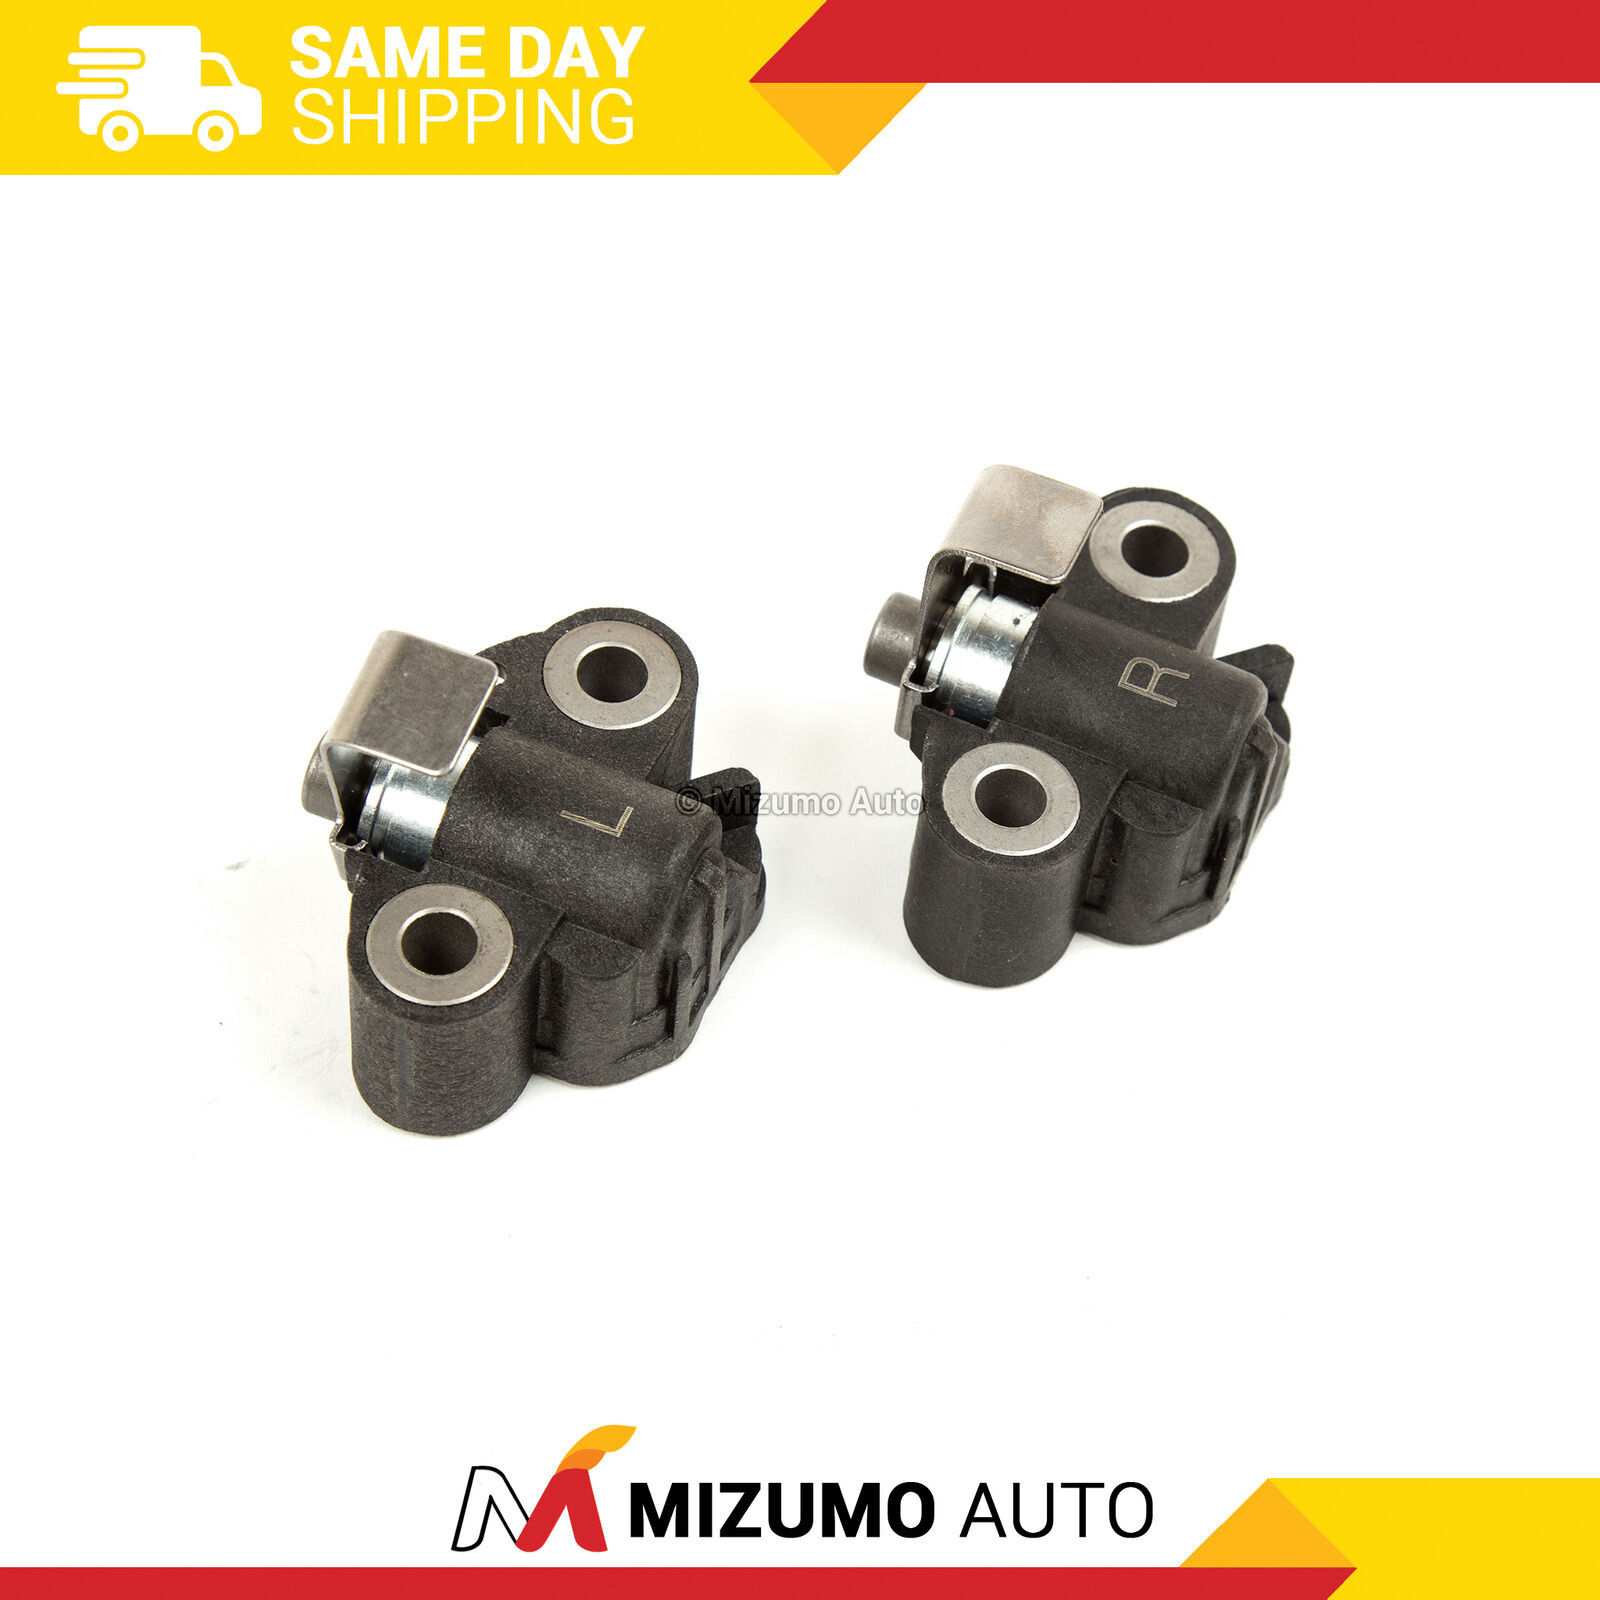 Upgrade Plastic Style Lower Timing 4.6 Max 49% OFF Tensioner Ford Chain Super sale period limited Fit